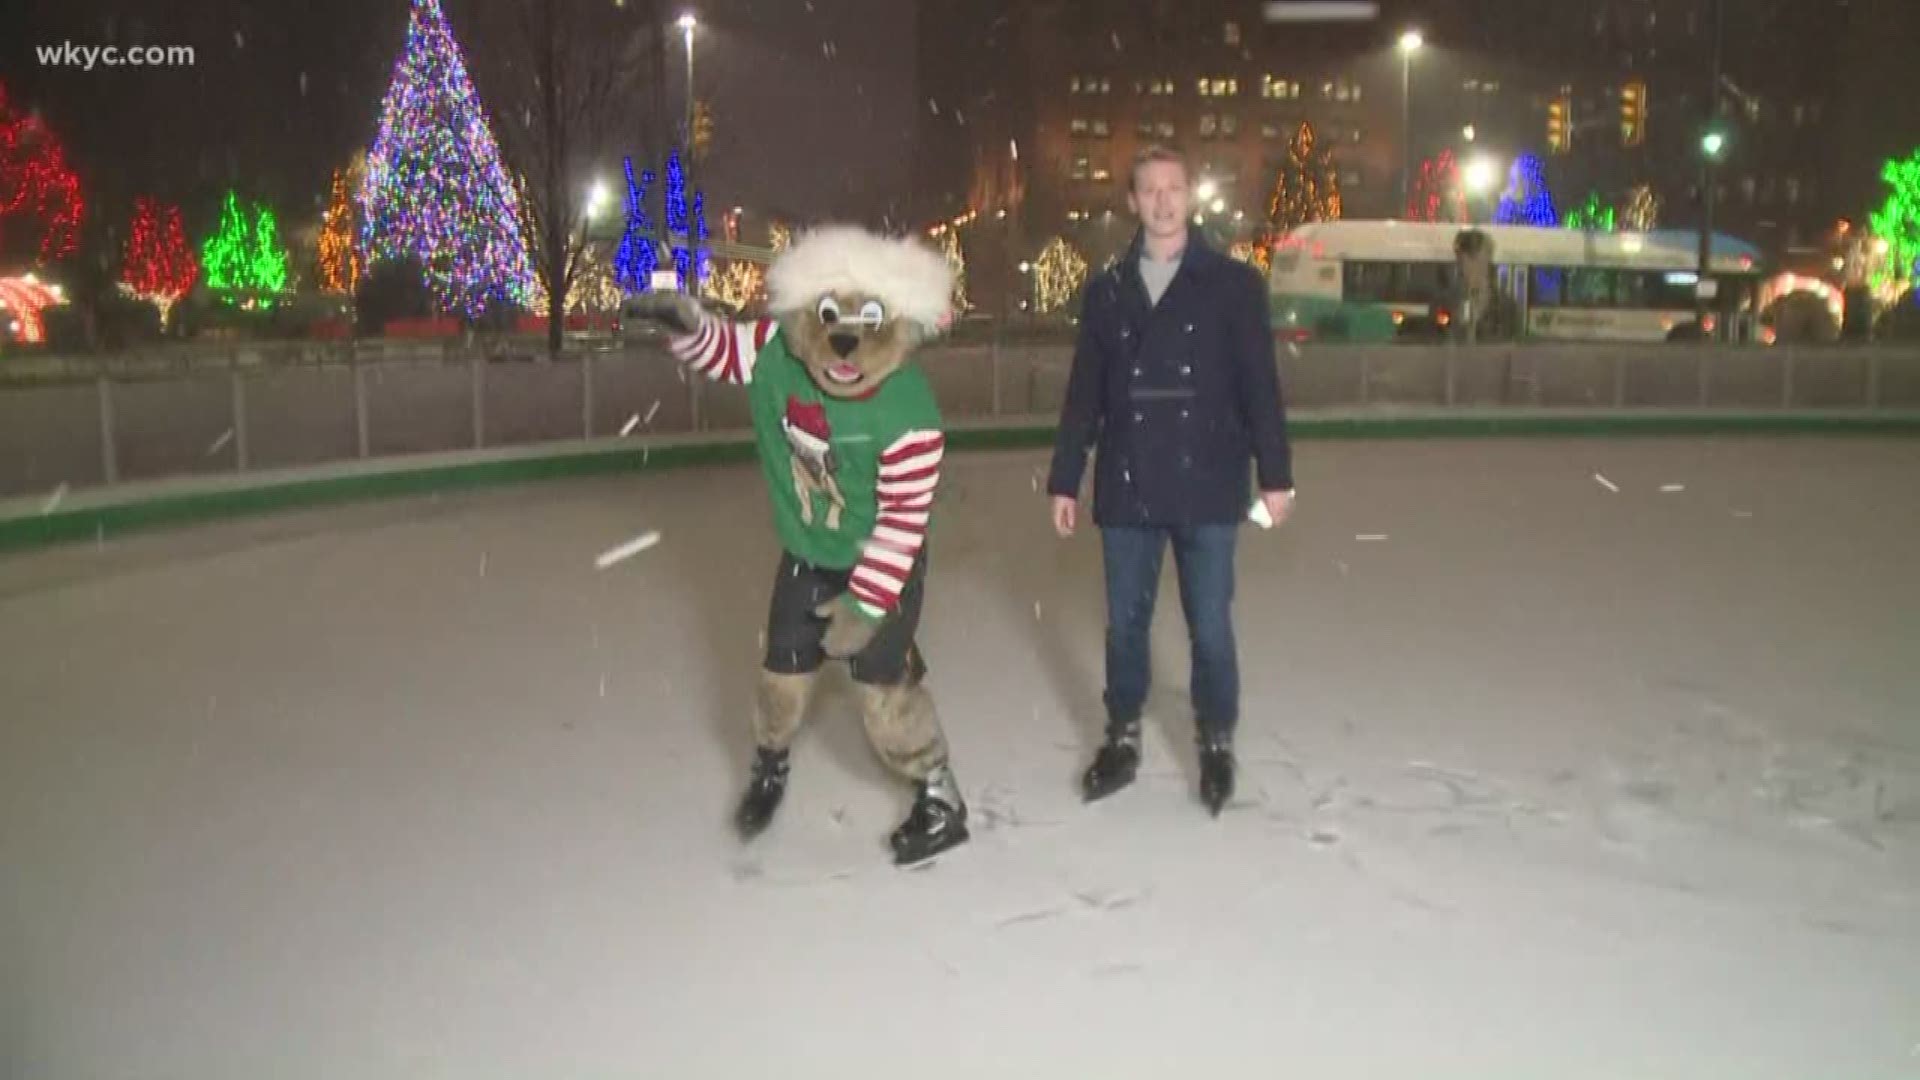 Austin Love checked out Public Square's ice rink ahead of WinterFest... and a special guest stopped by.